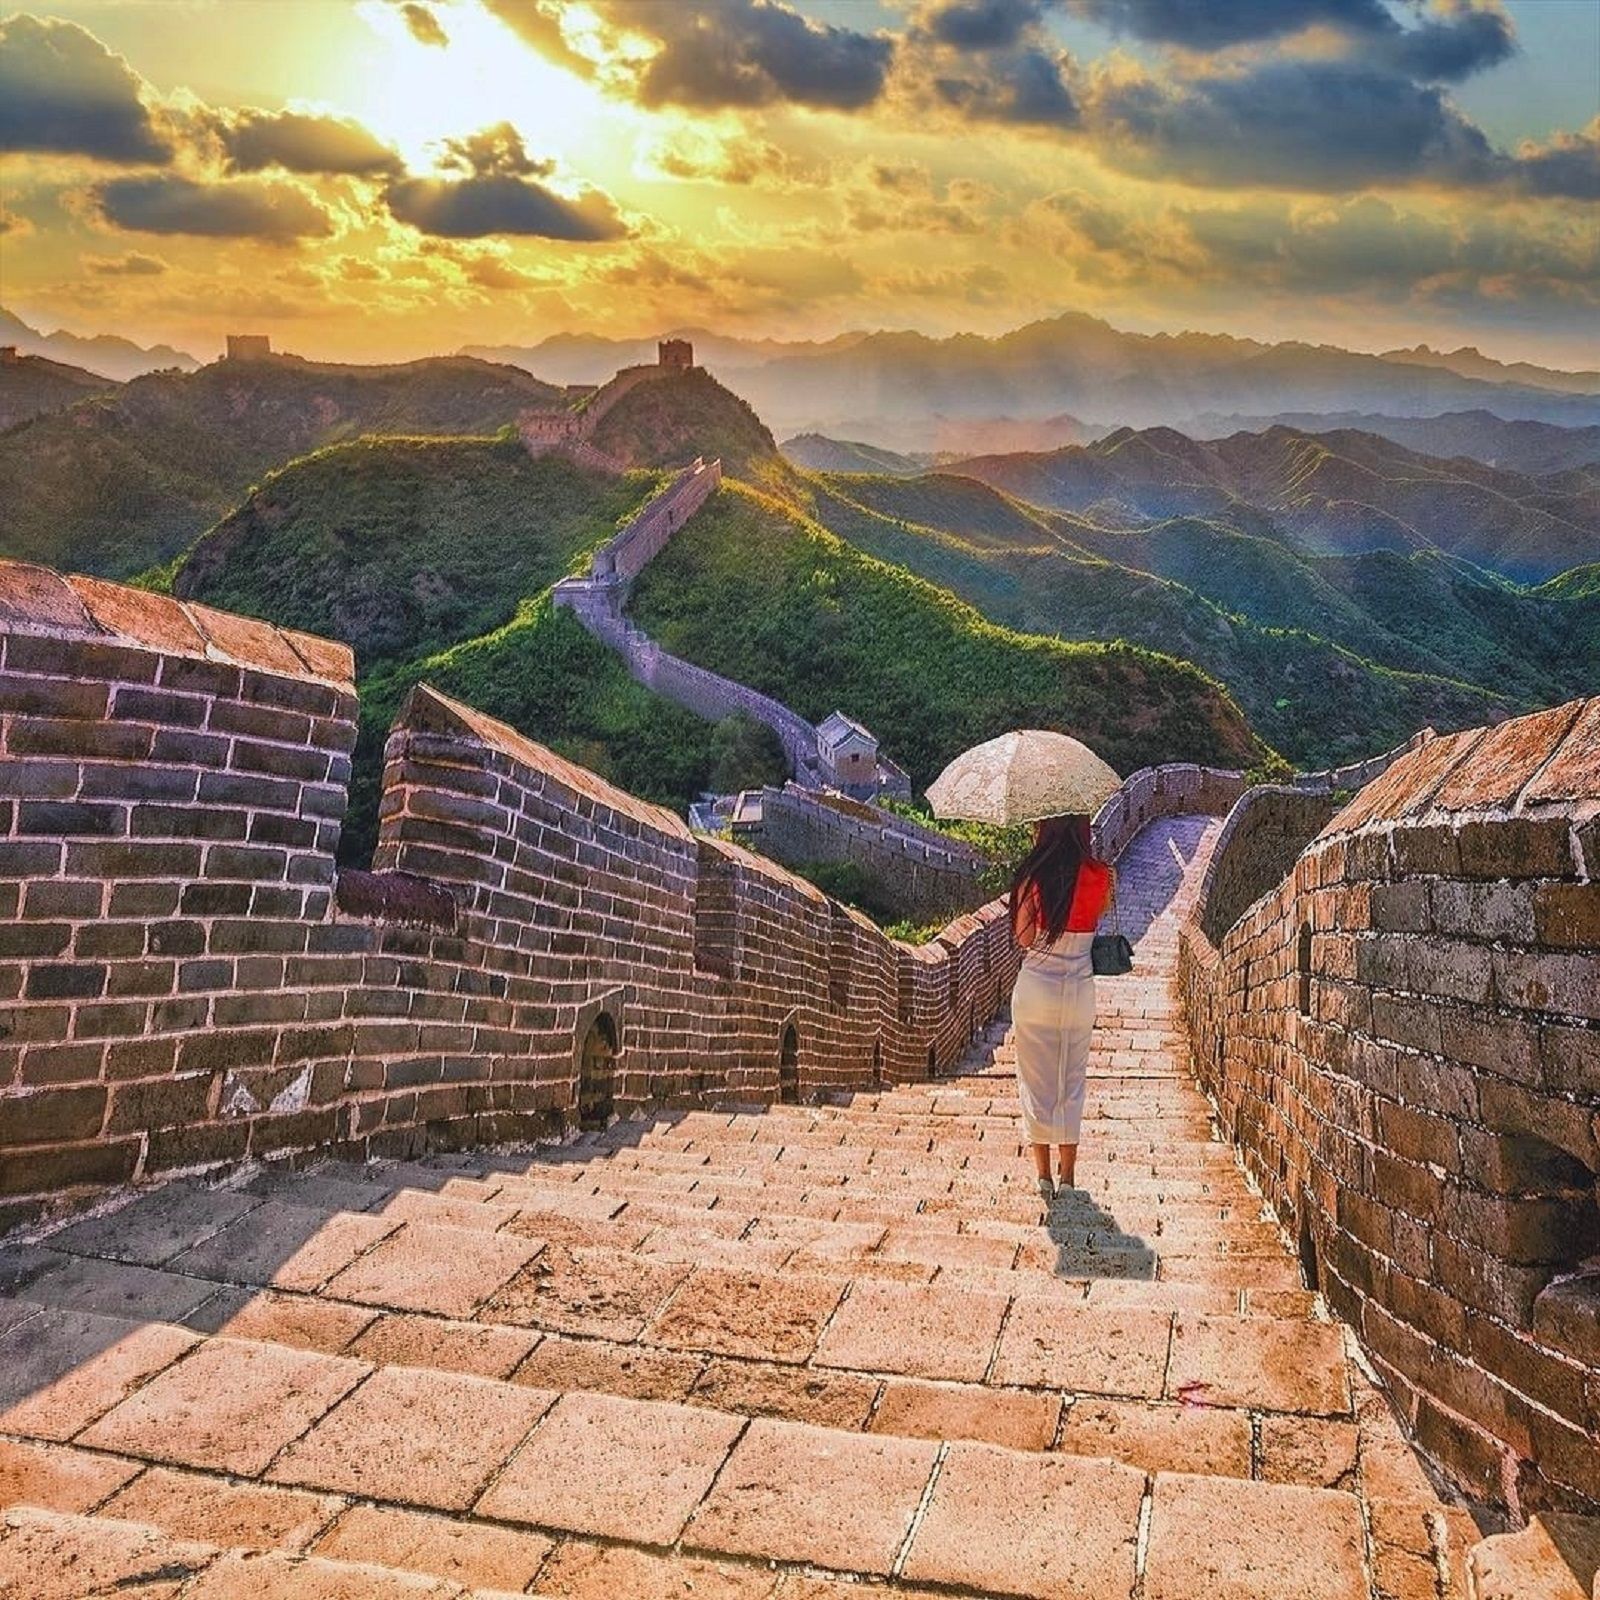 30 most instagrammed landmarks from around the world image 26